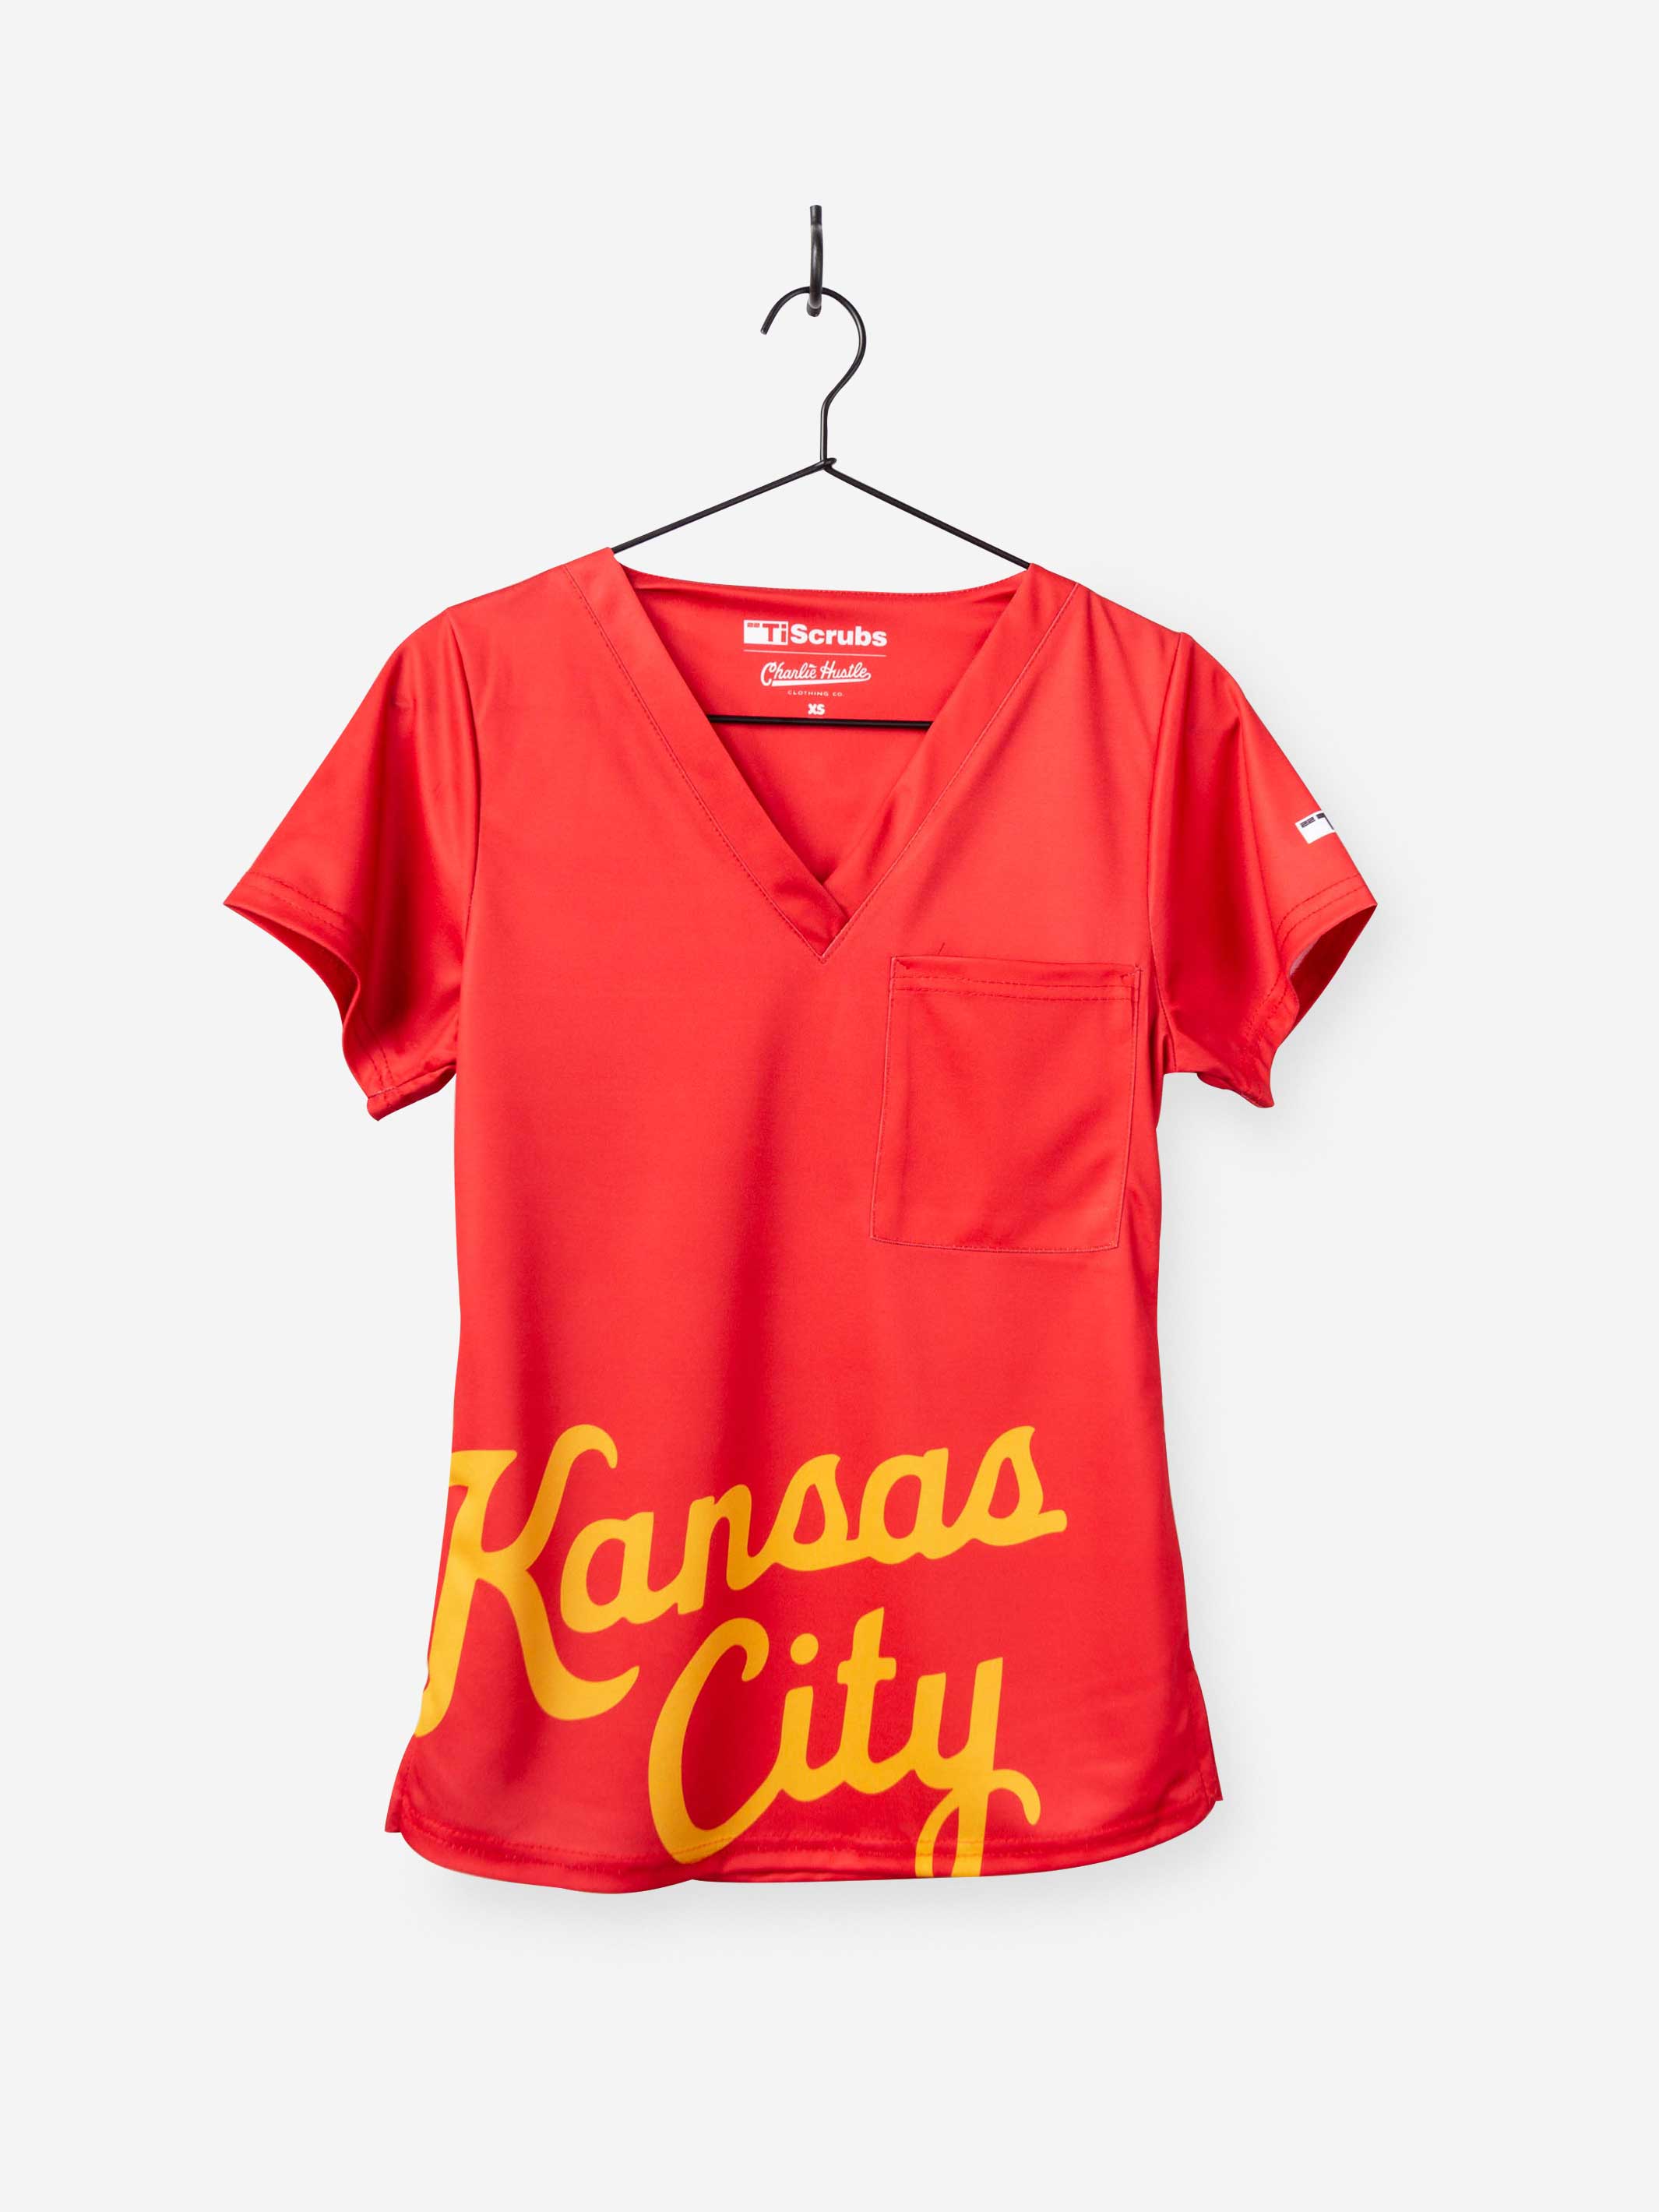 Women's Charlie Hustle Scrub Top with Kansas City Script in Red and Gold